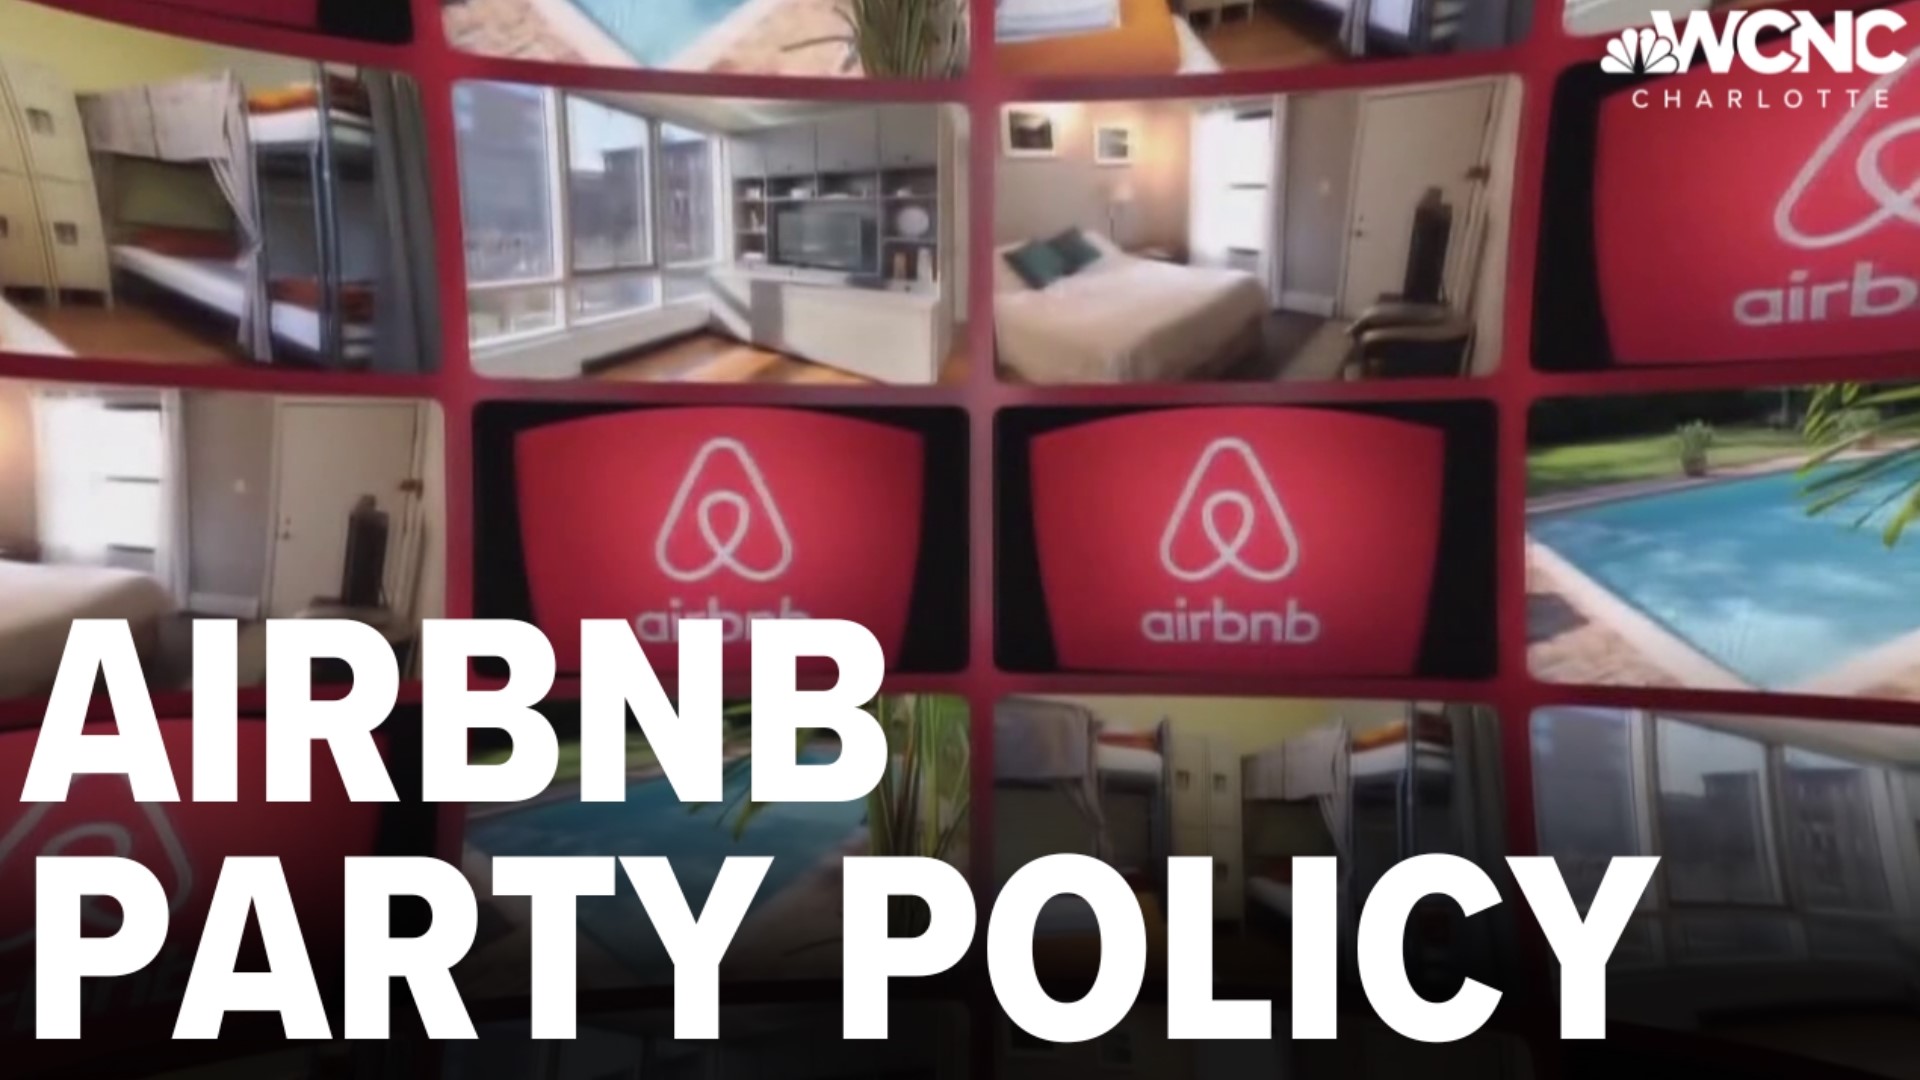 Airbnb is placing some restrictions on their properties to cut down on partying complaints.